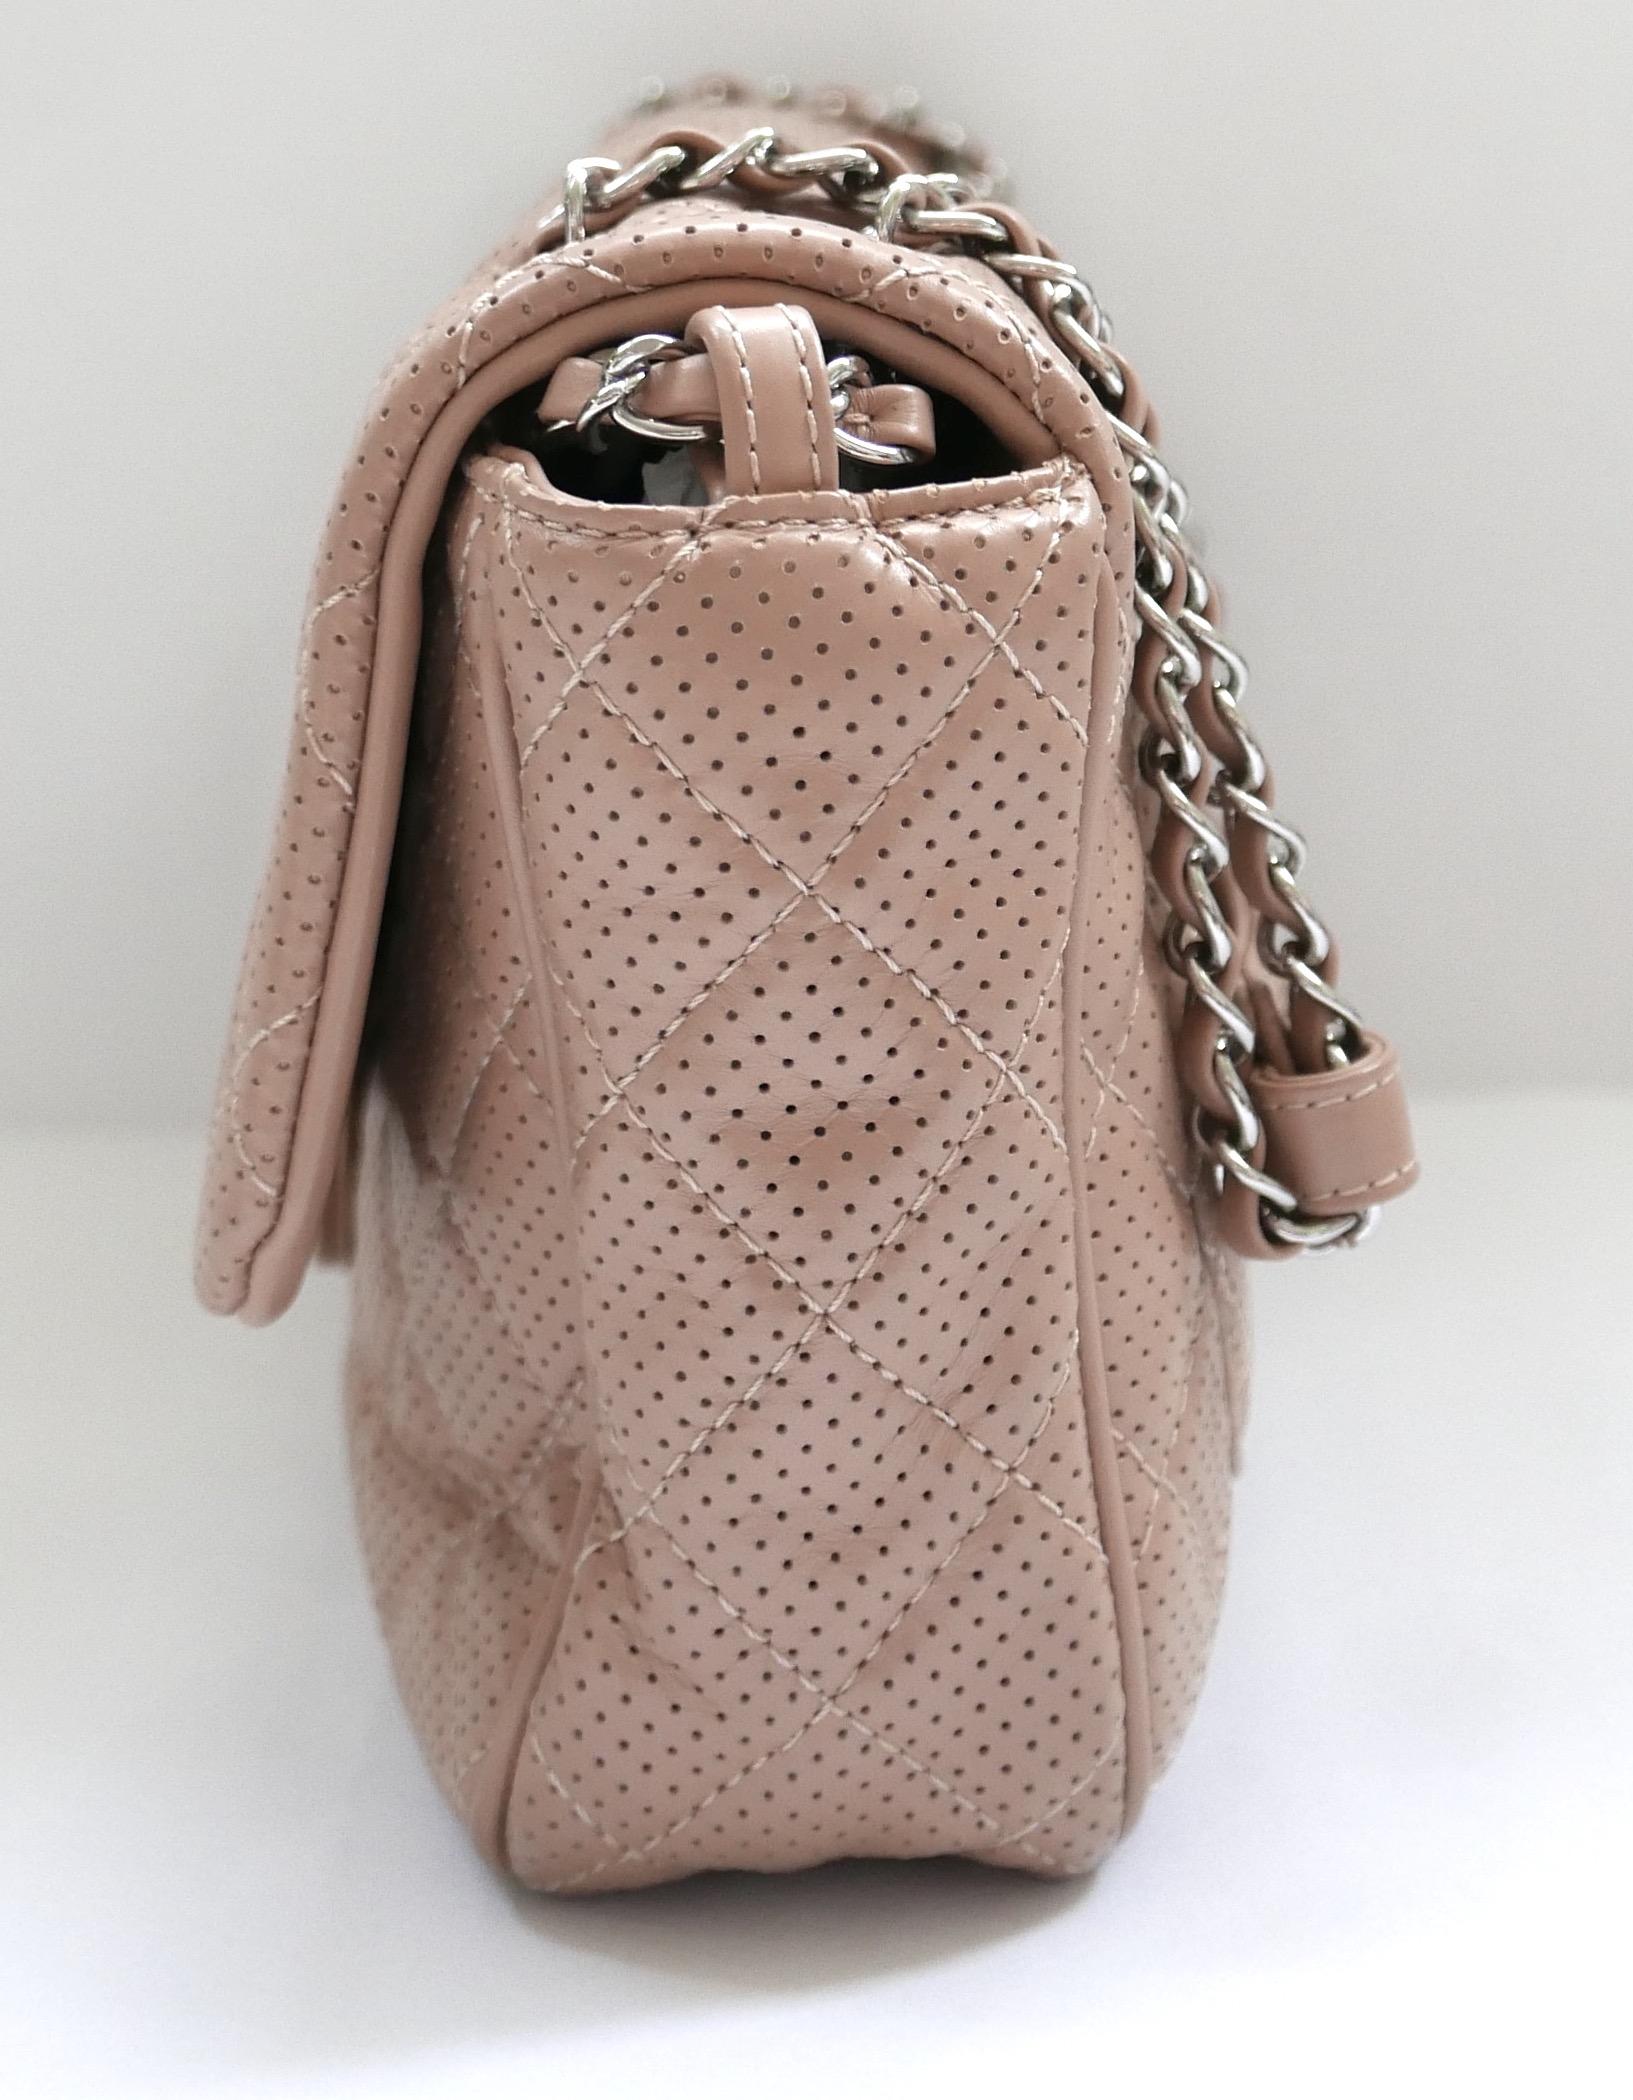 Chanel Beige Perforated Leather Classique Flap Bag For Sale 1